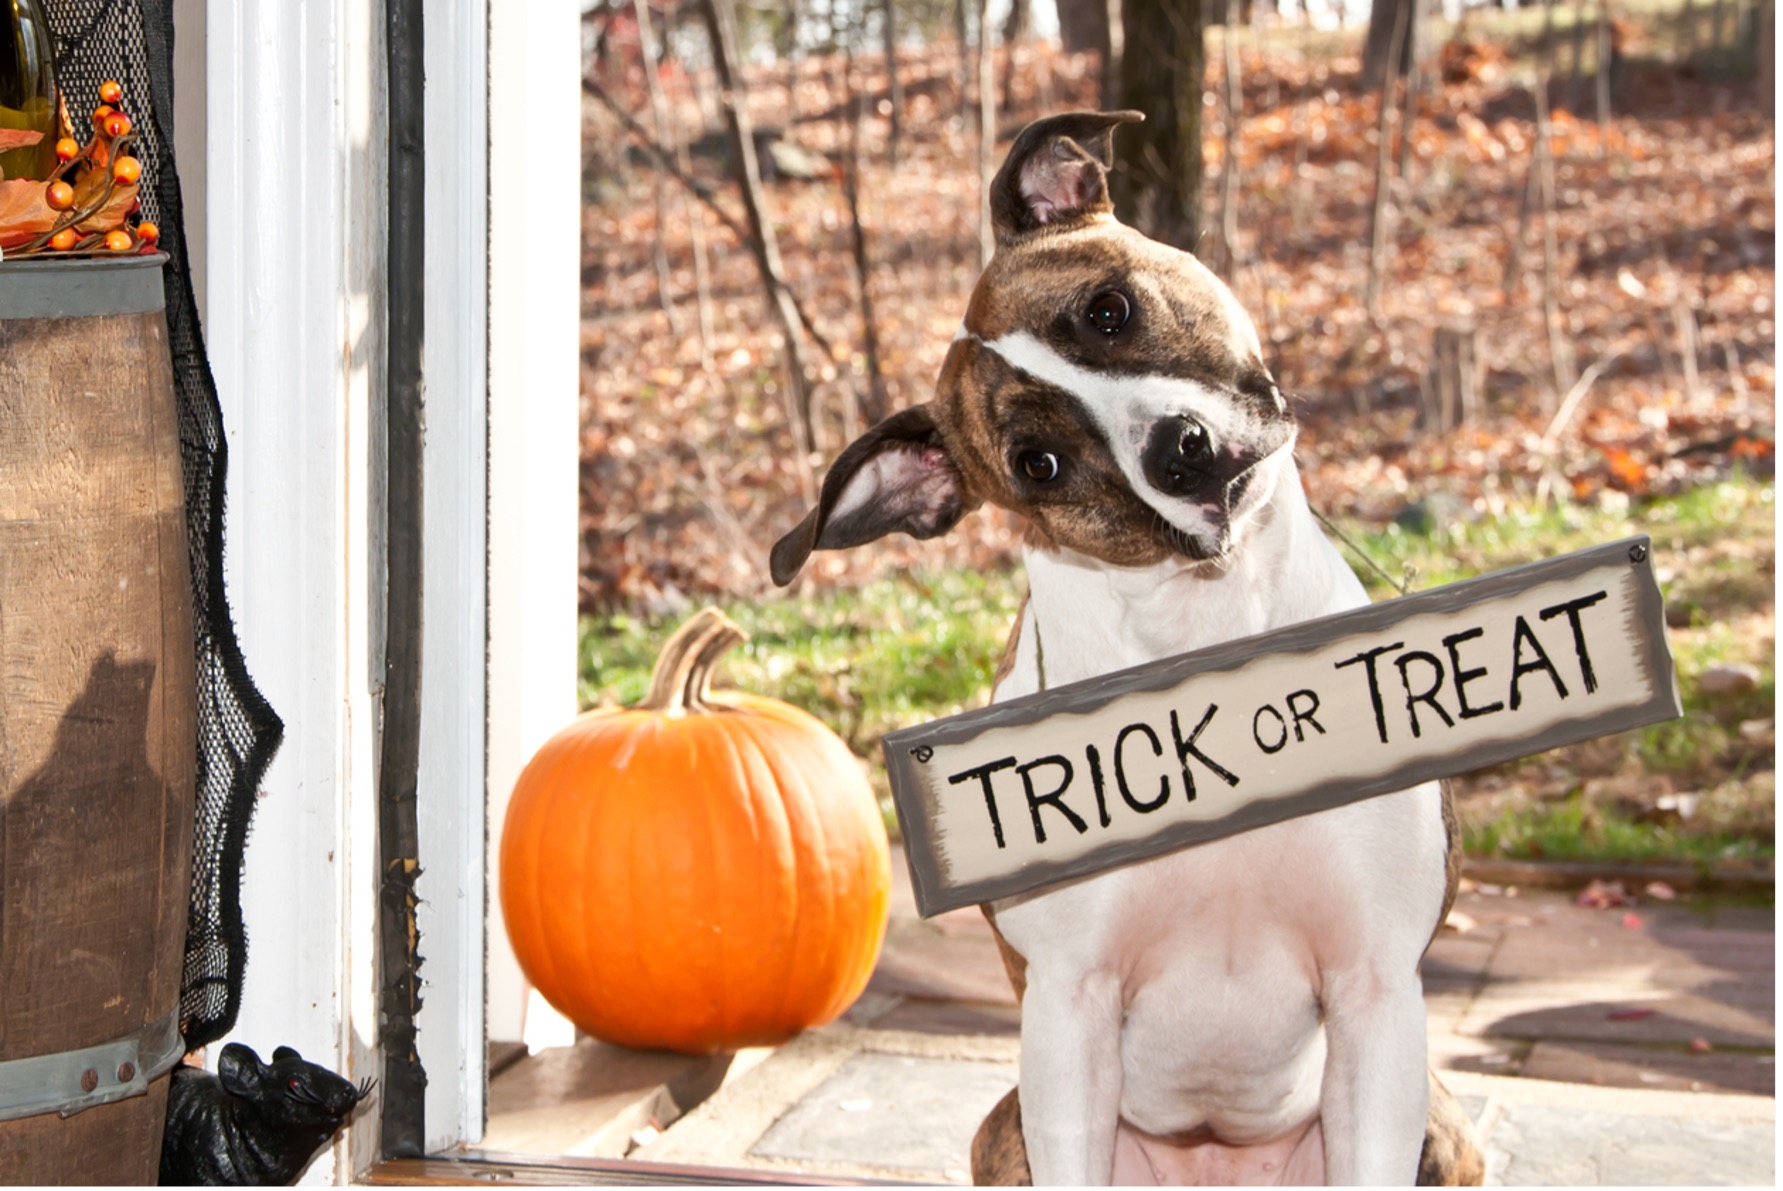 A dog holding a trick or treat sign